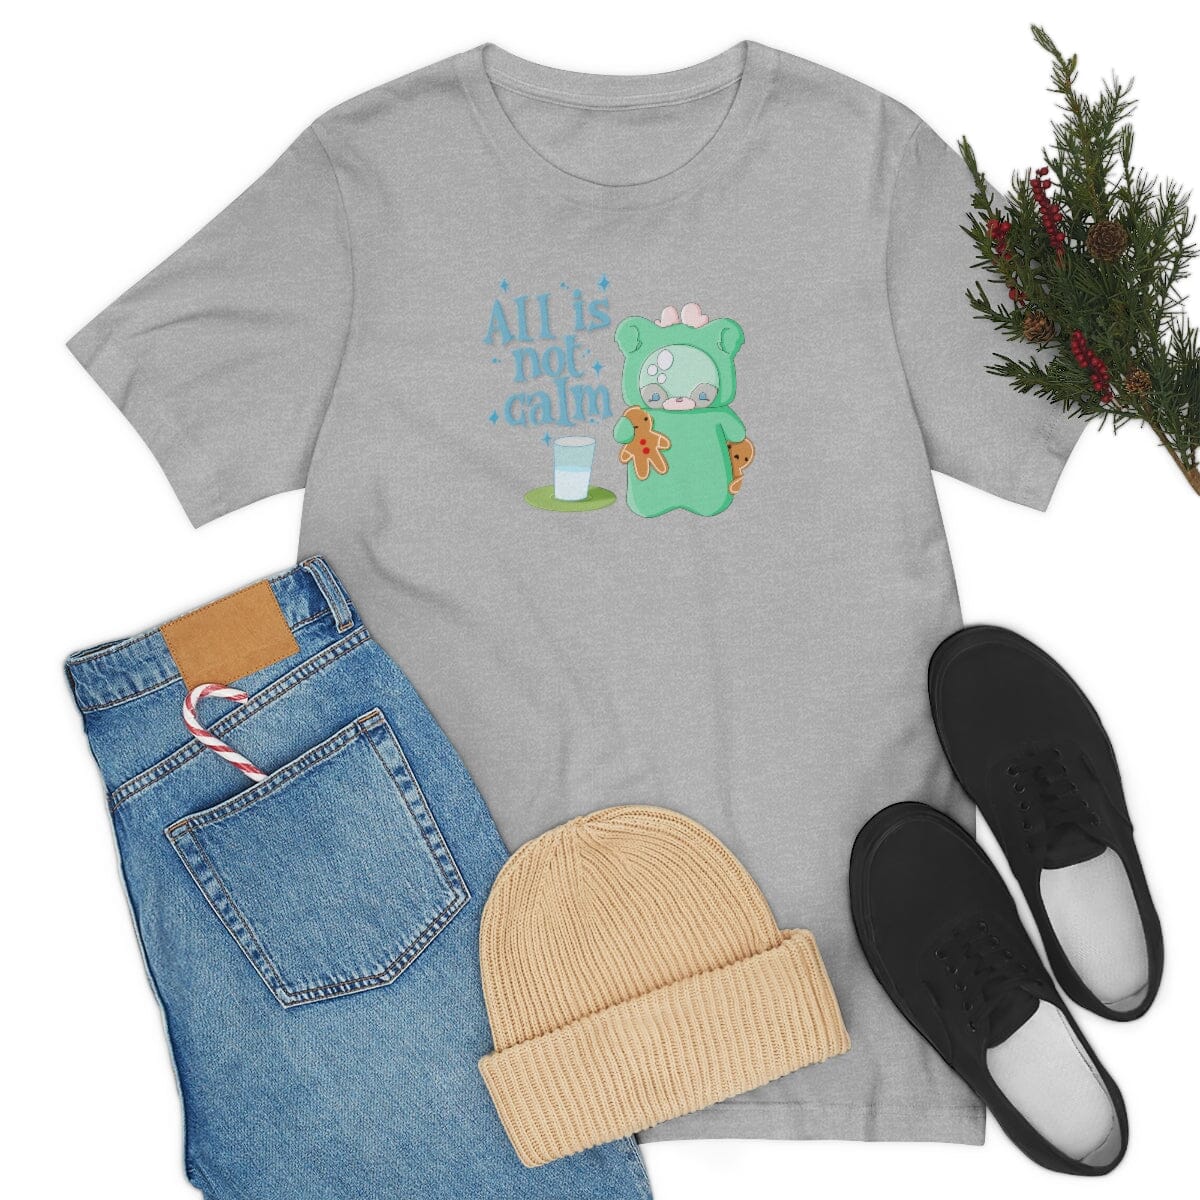 The Griswold Unisex Tee